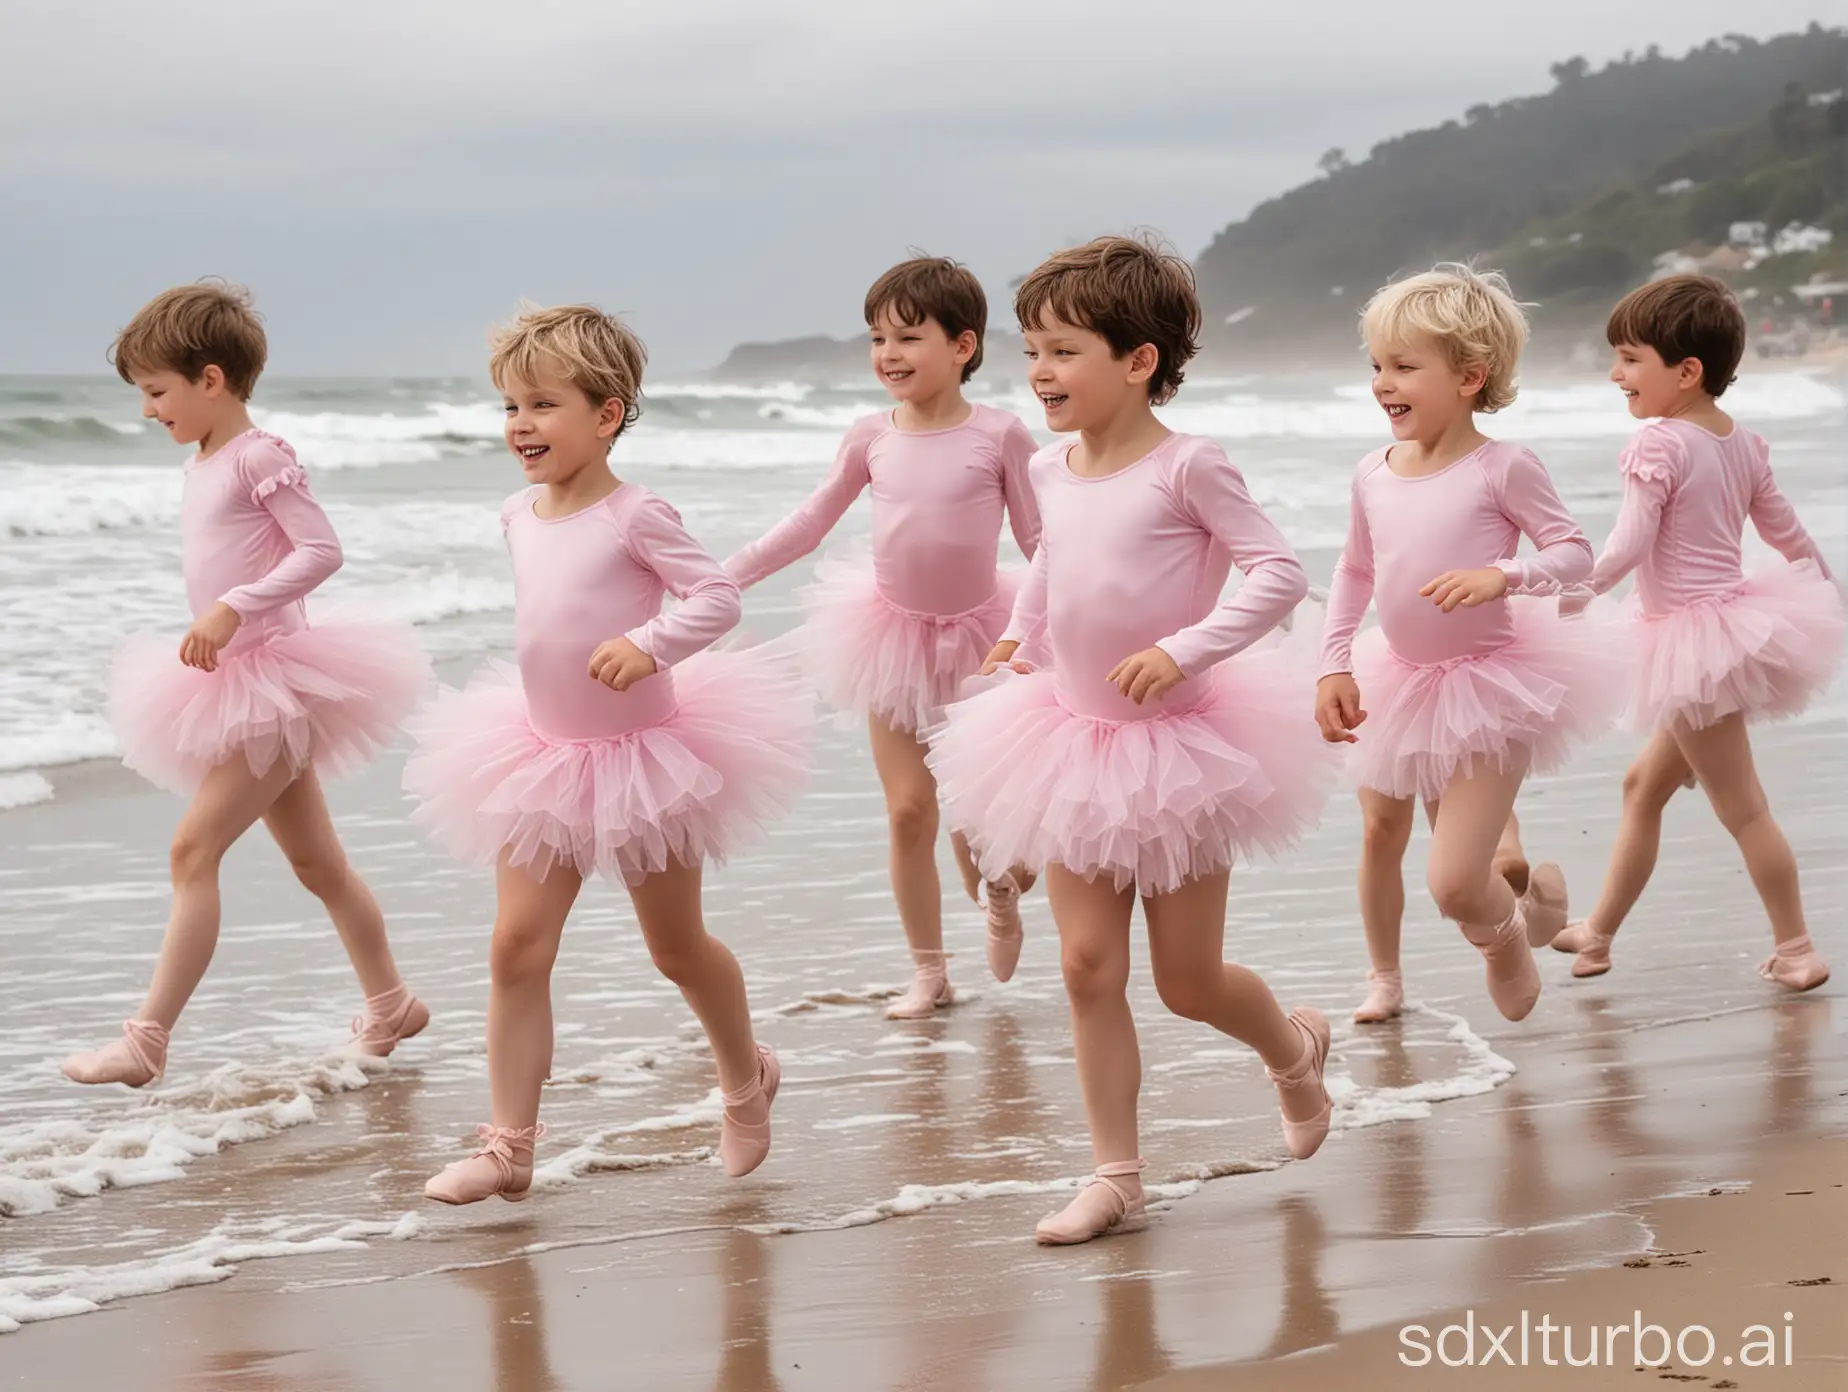 (((Gender role reversal)))), A bunch of short-haired 8-year-old boys running along a beach shoreline in silky pink ballerina leotards with sleeves and frilly tutus for charity, energetic